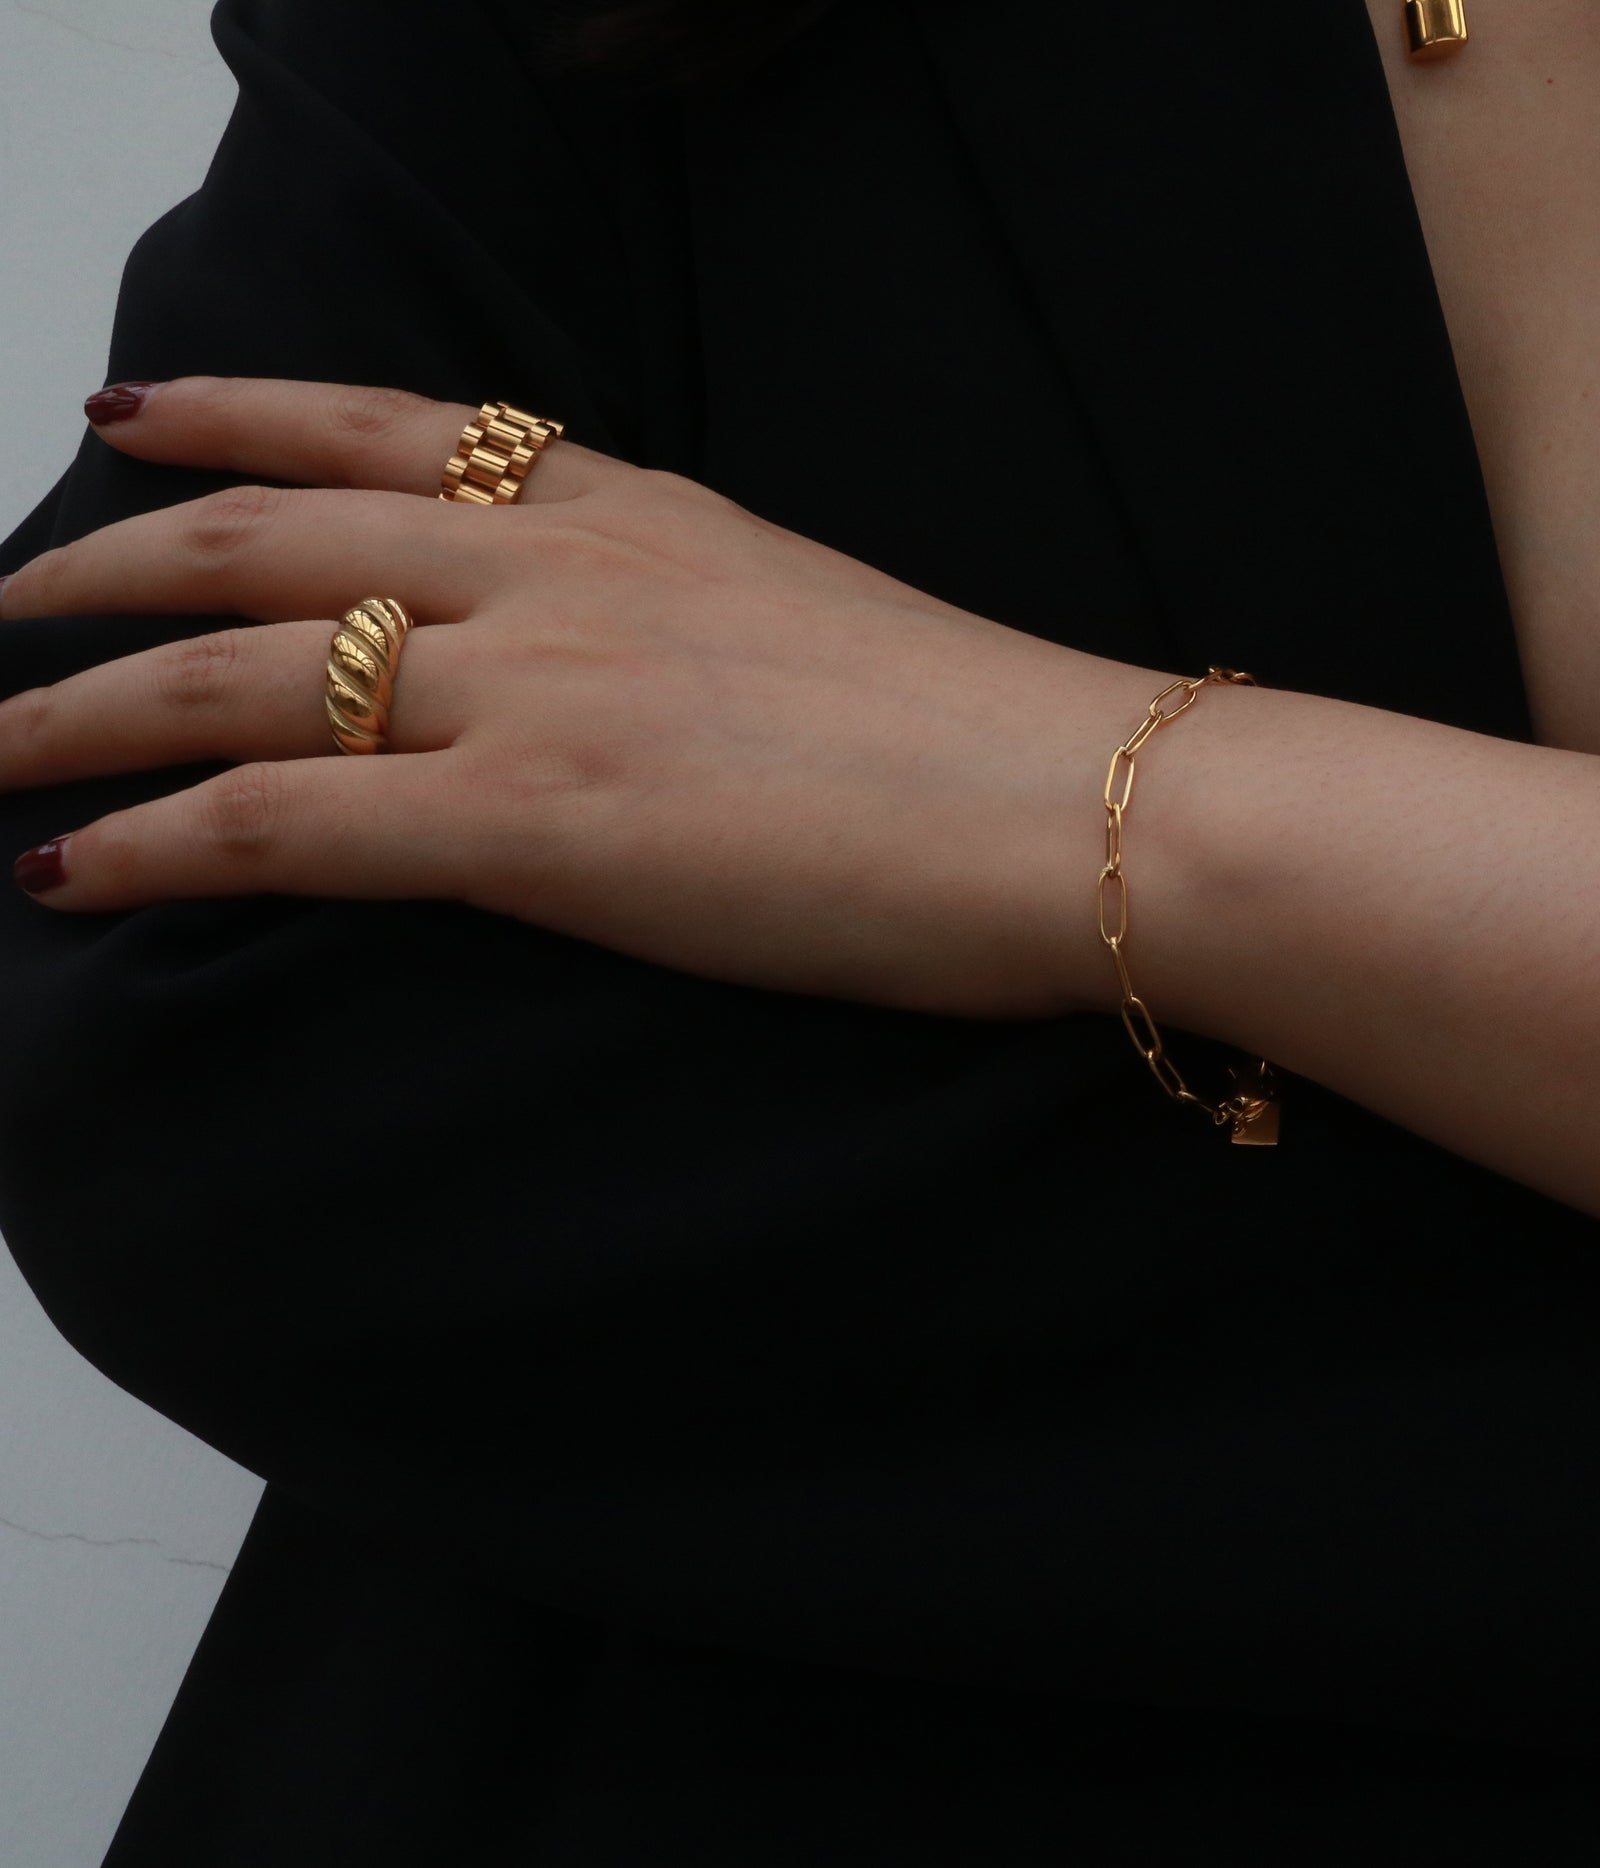 18k gold plated rings and bracelet by Meideya Jewelry